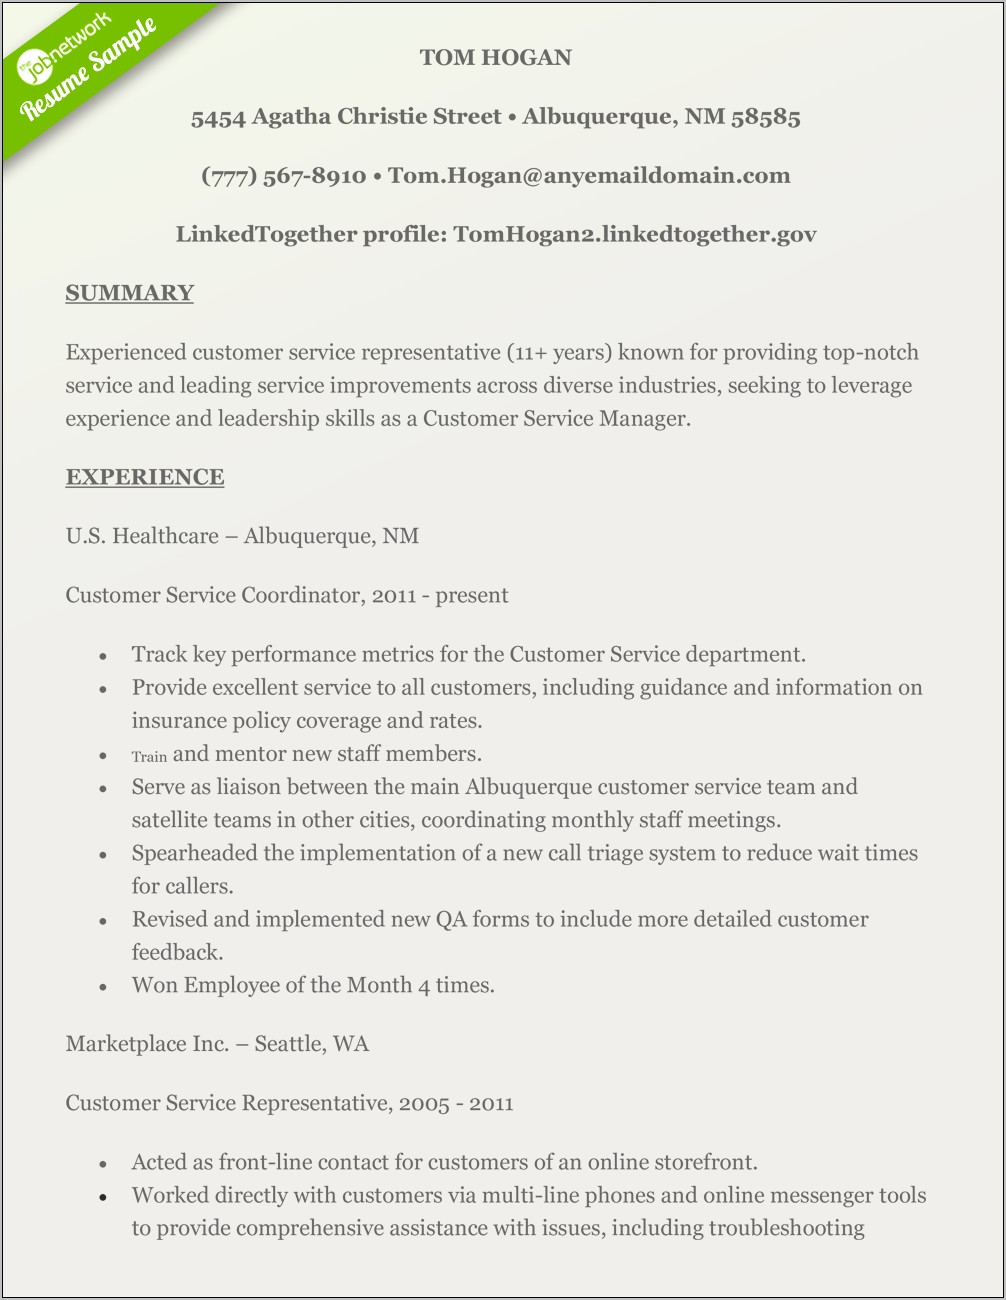 Customer Service Resume Introduction Examples